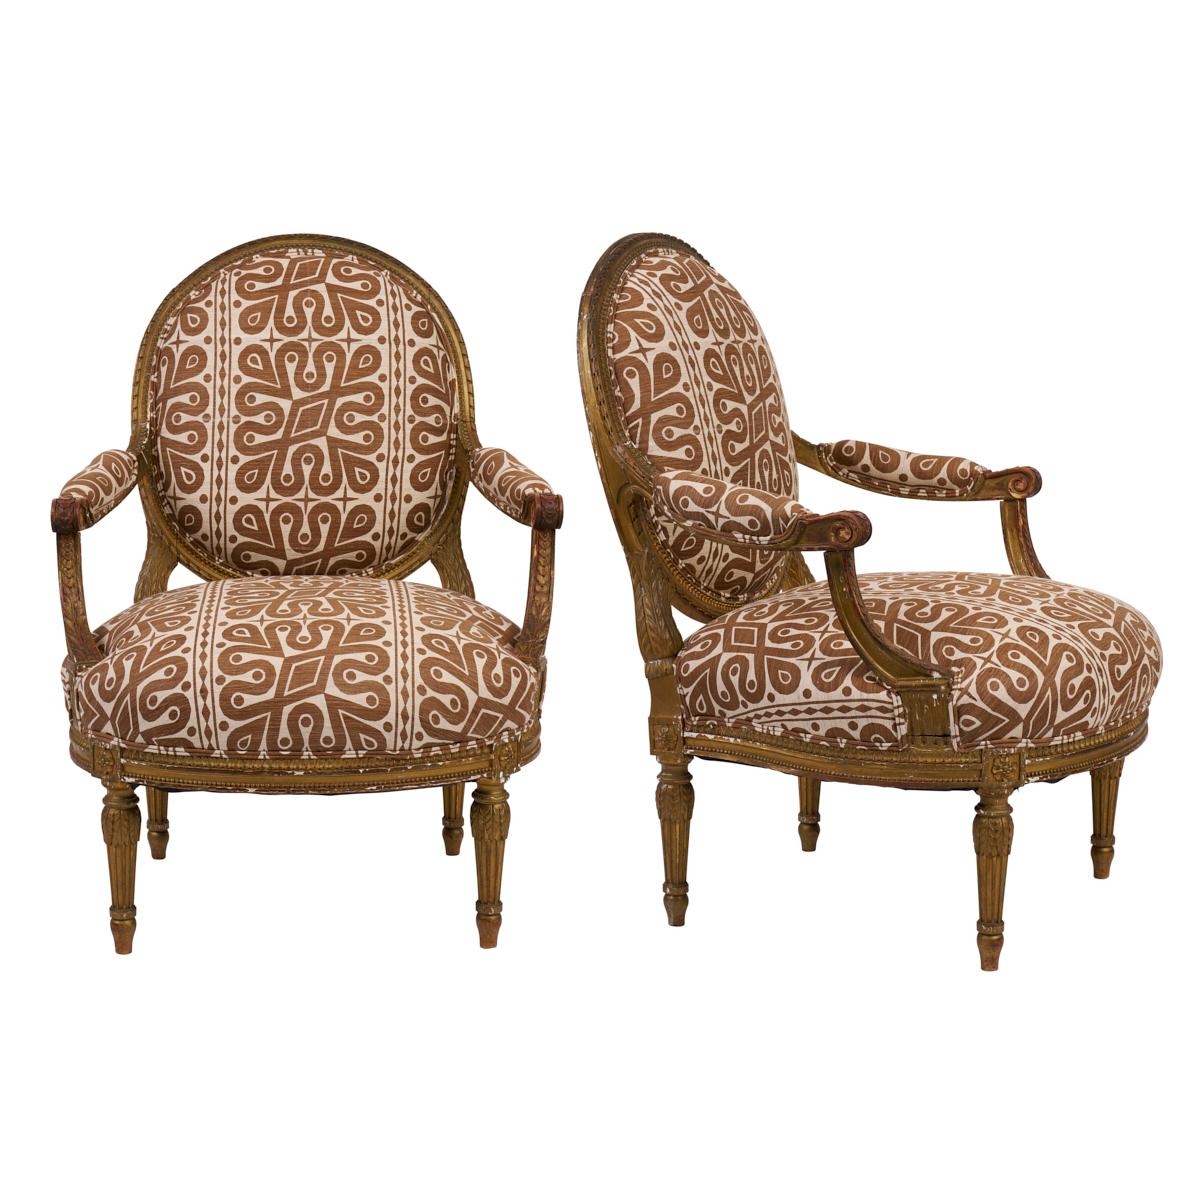 Pair of 19th Century Fauteuils Chairs, Newly Upholstered Fabric For Sale